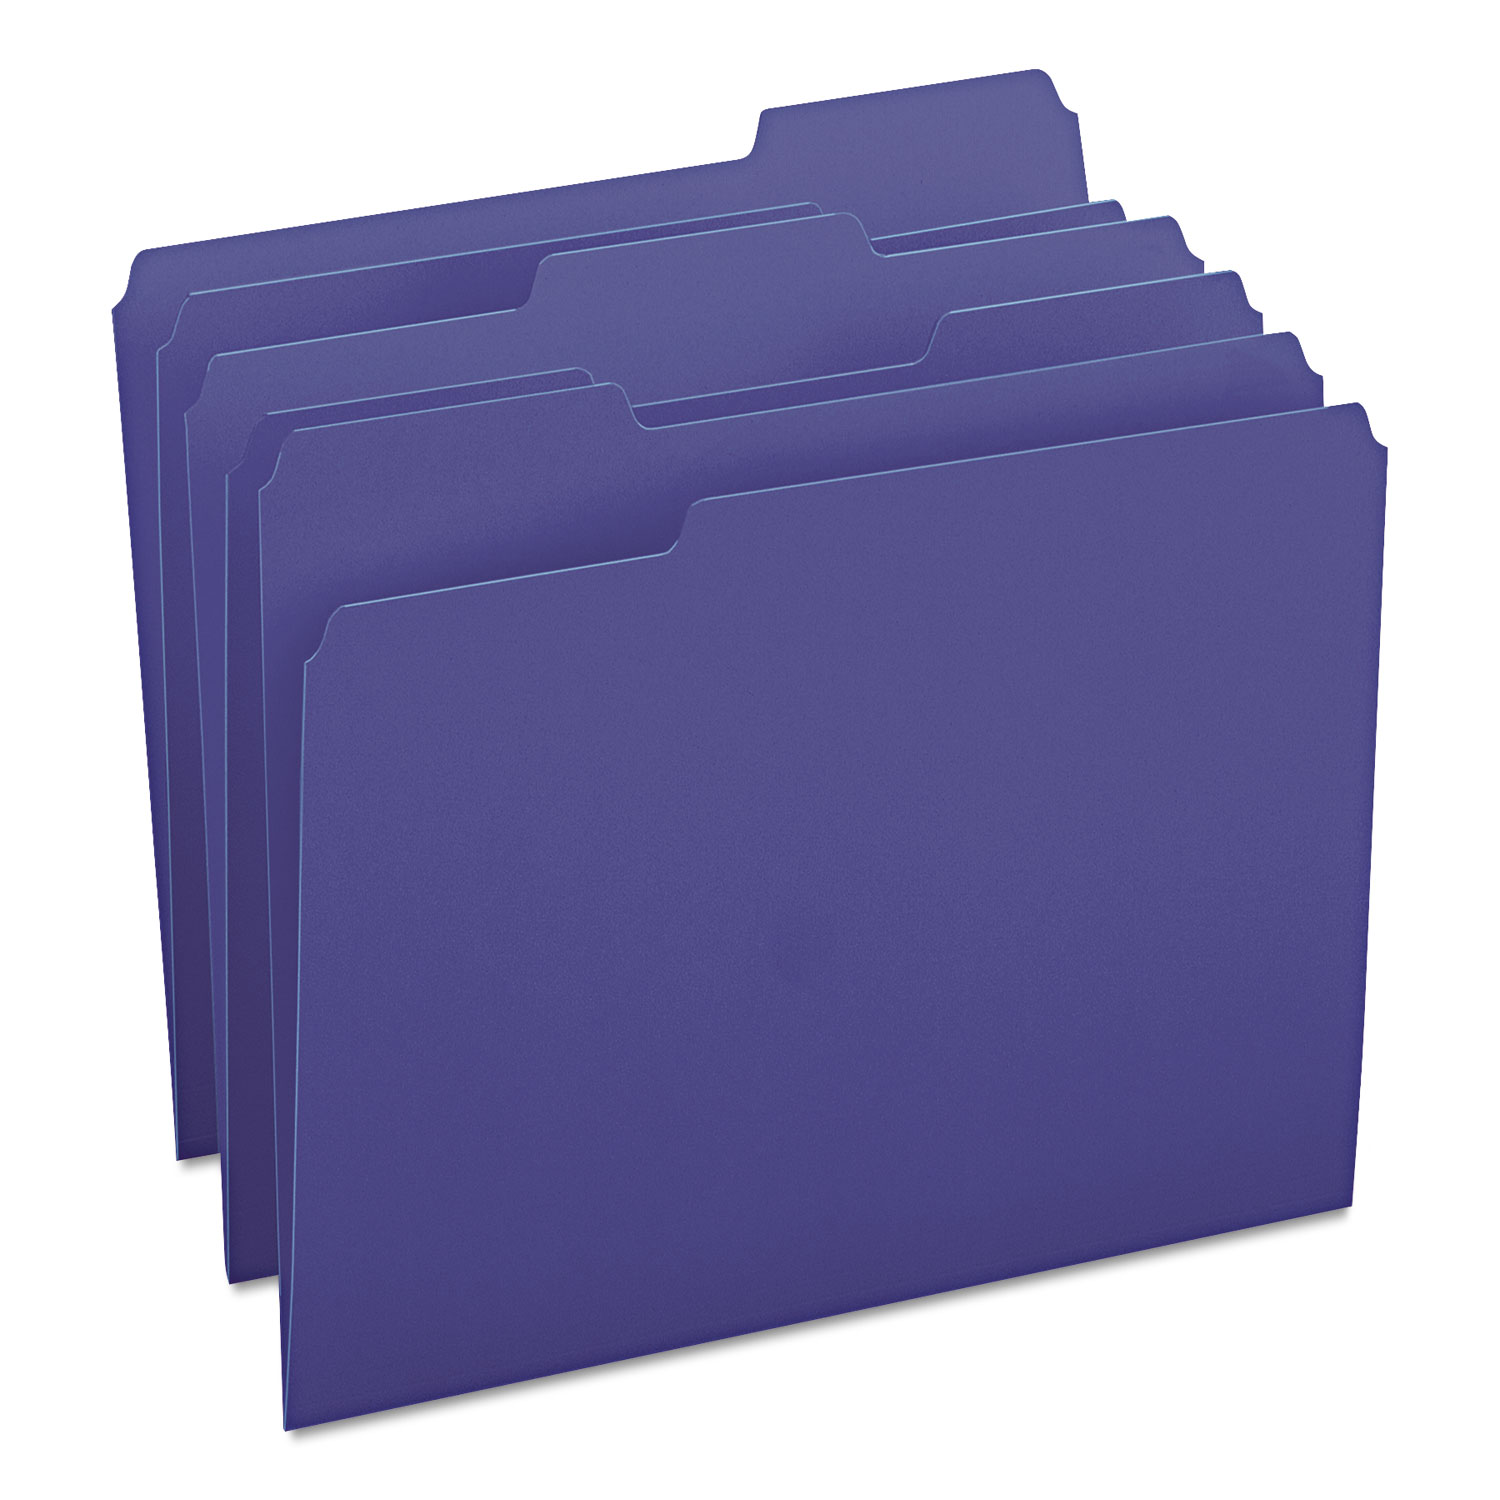  Smead 13193 Colored File Folders, 1/3-Cut Tabs, Letter Size, Navy Blue, 100/Box (SMD13193) 